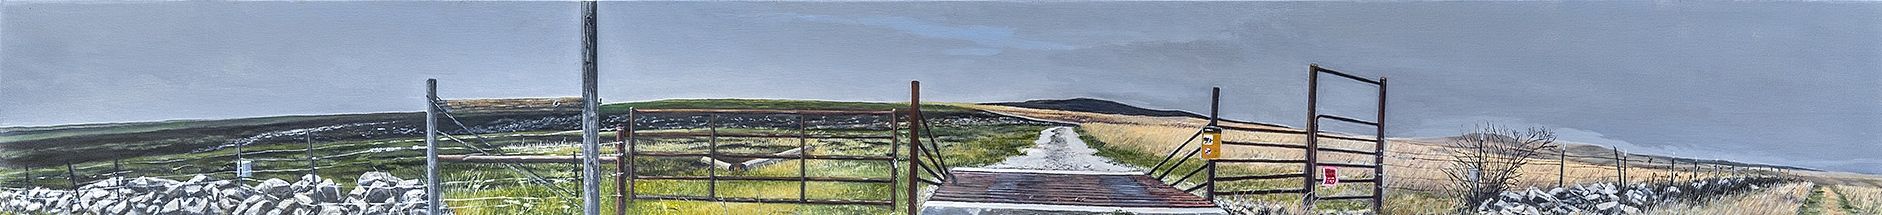 Cattle Gate, Nation Tall Grass Prairie by Russell Horton, Oil on canvas over board, 8 3⁄4”x70 3⁄4”, $3000